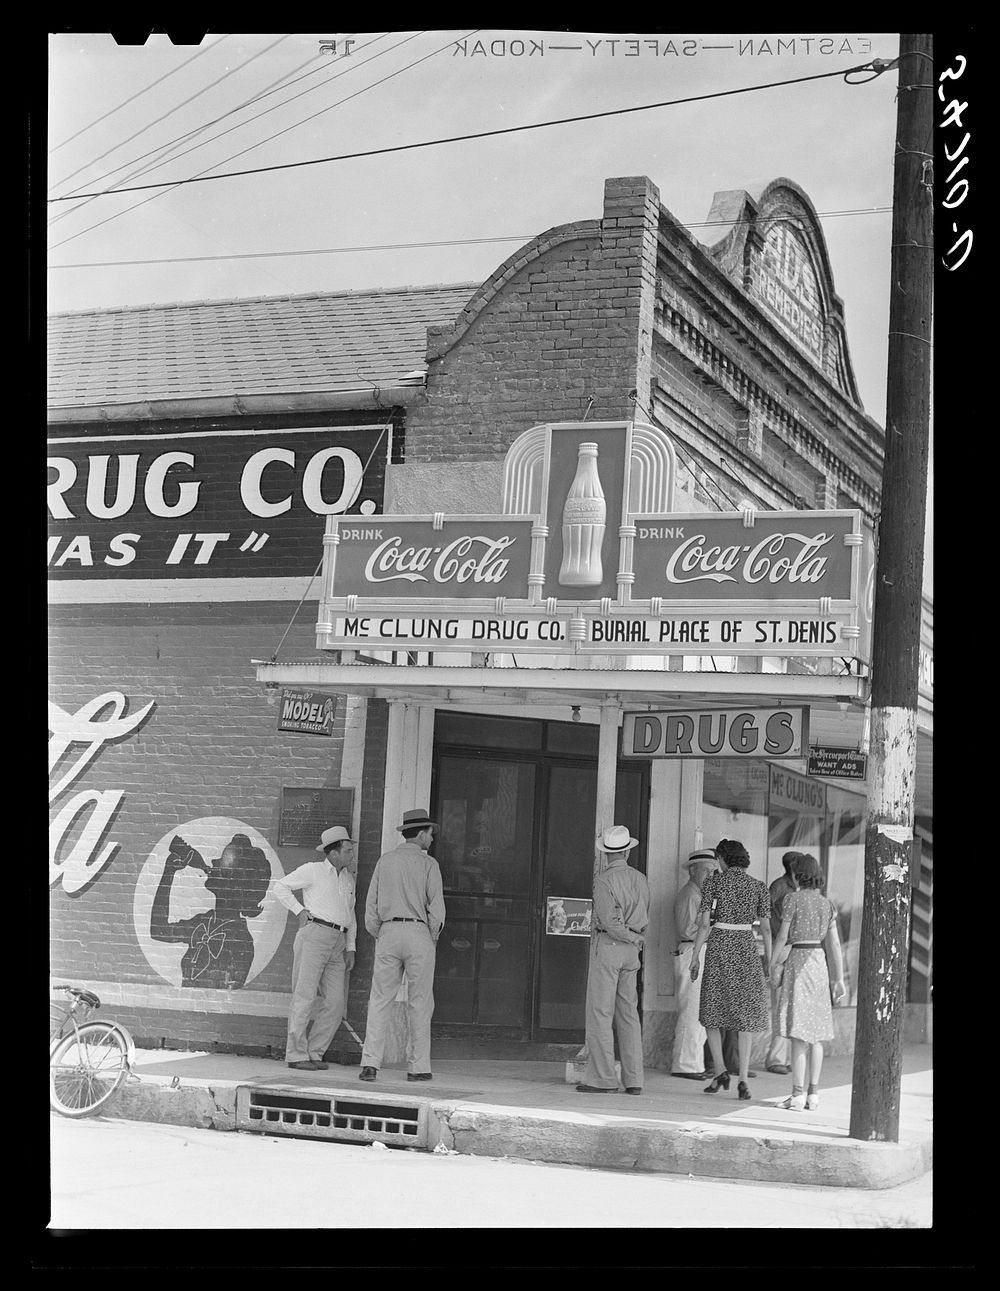 Natchitoches, Louisiana. Sourced from the Library of Congress.